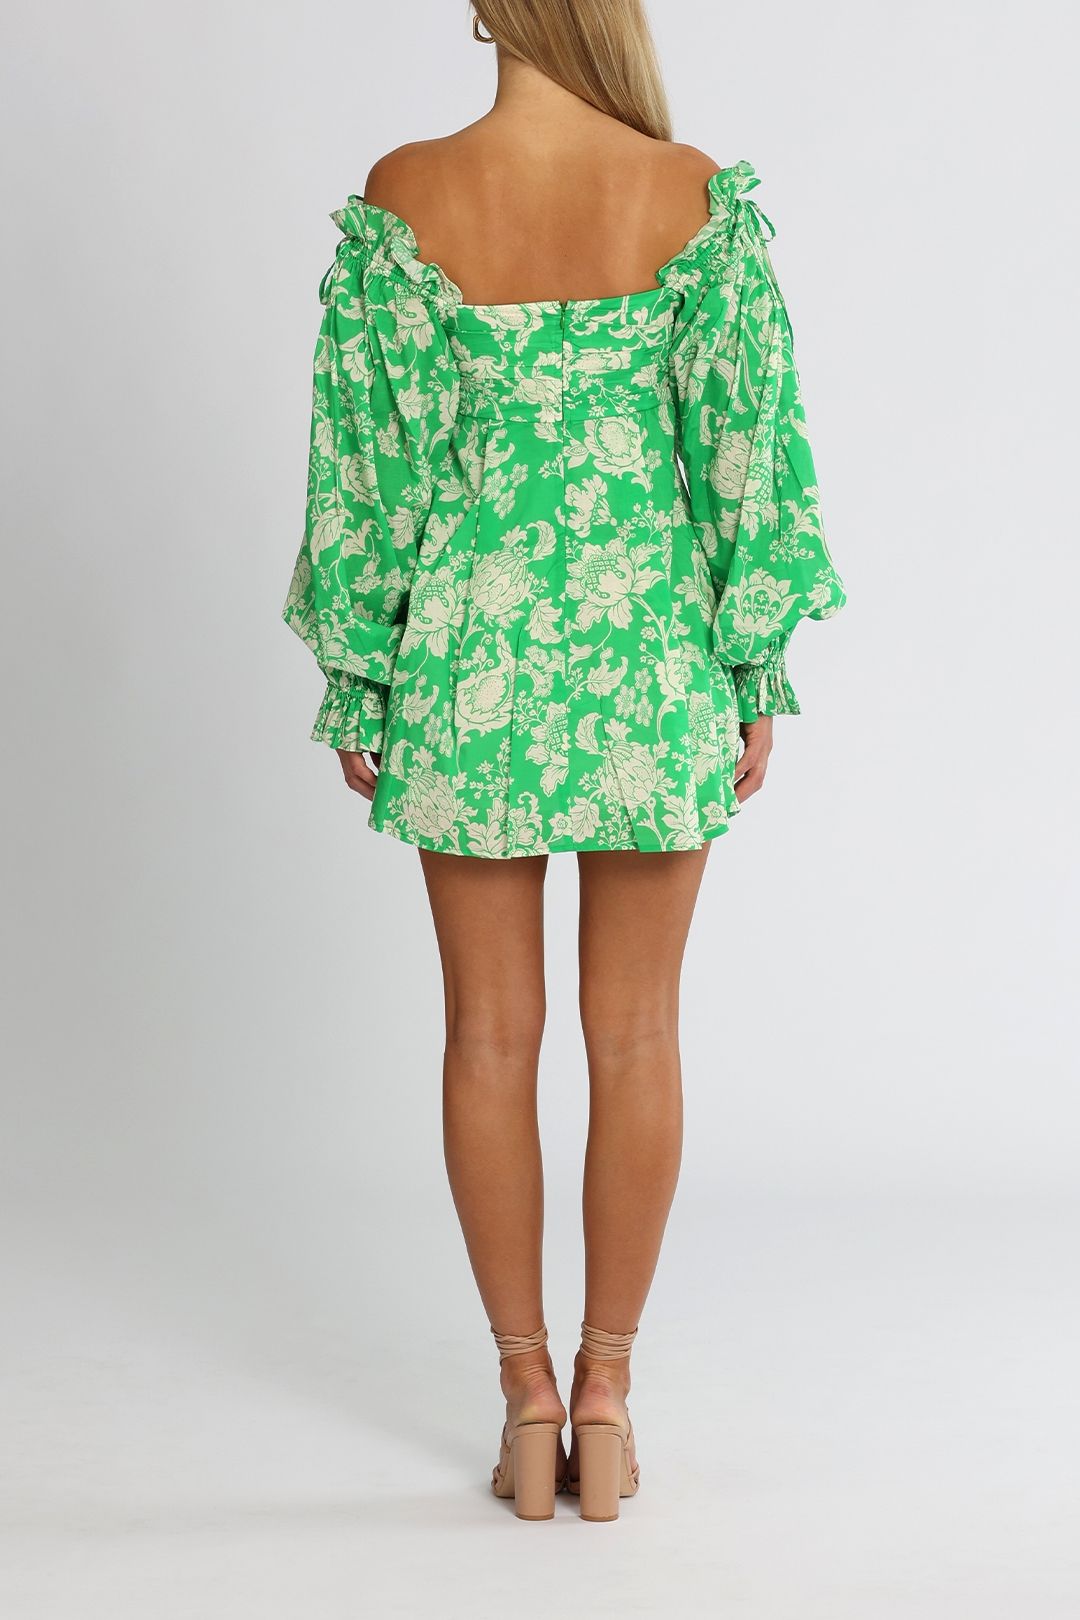 Alice McCall Mary Anne Mini Dress Green Floral